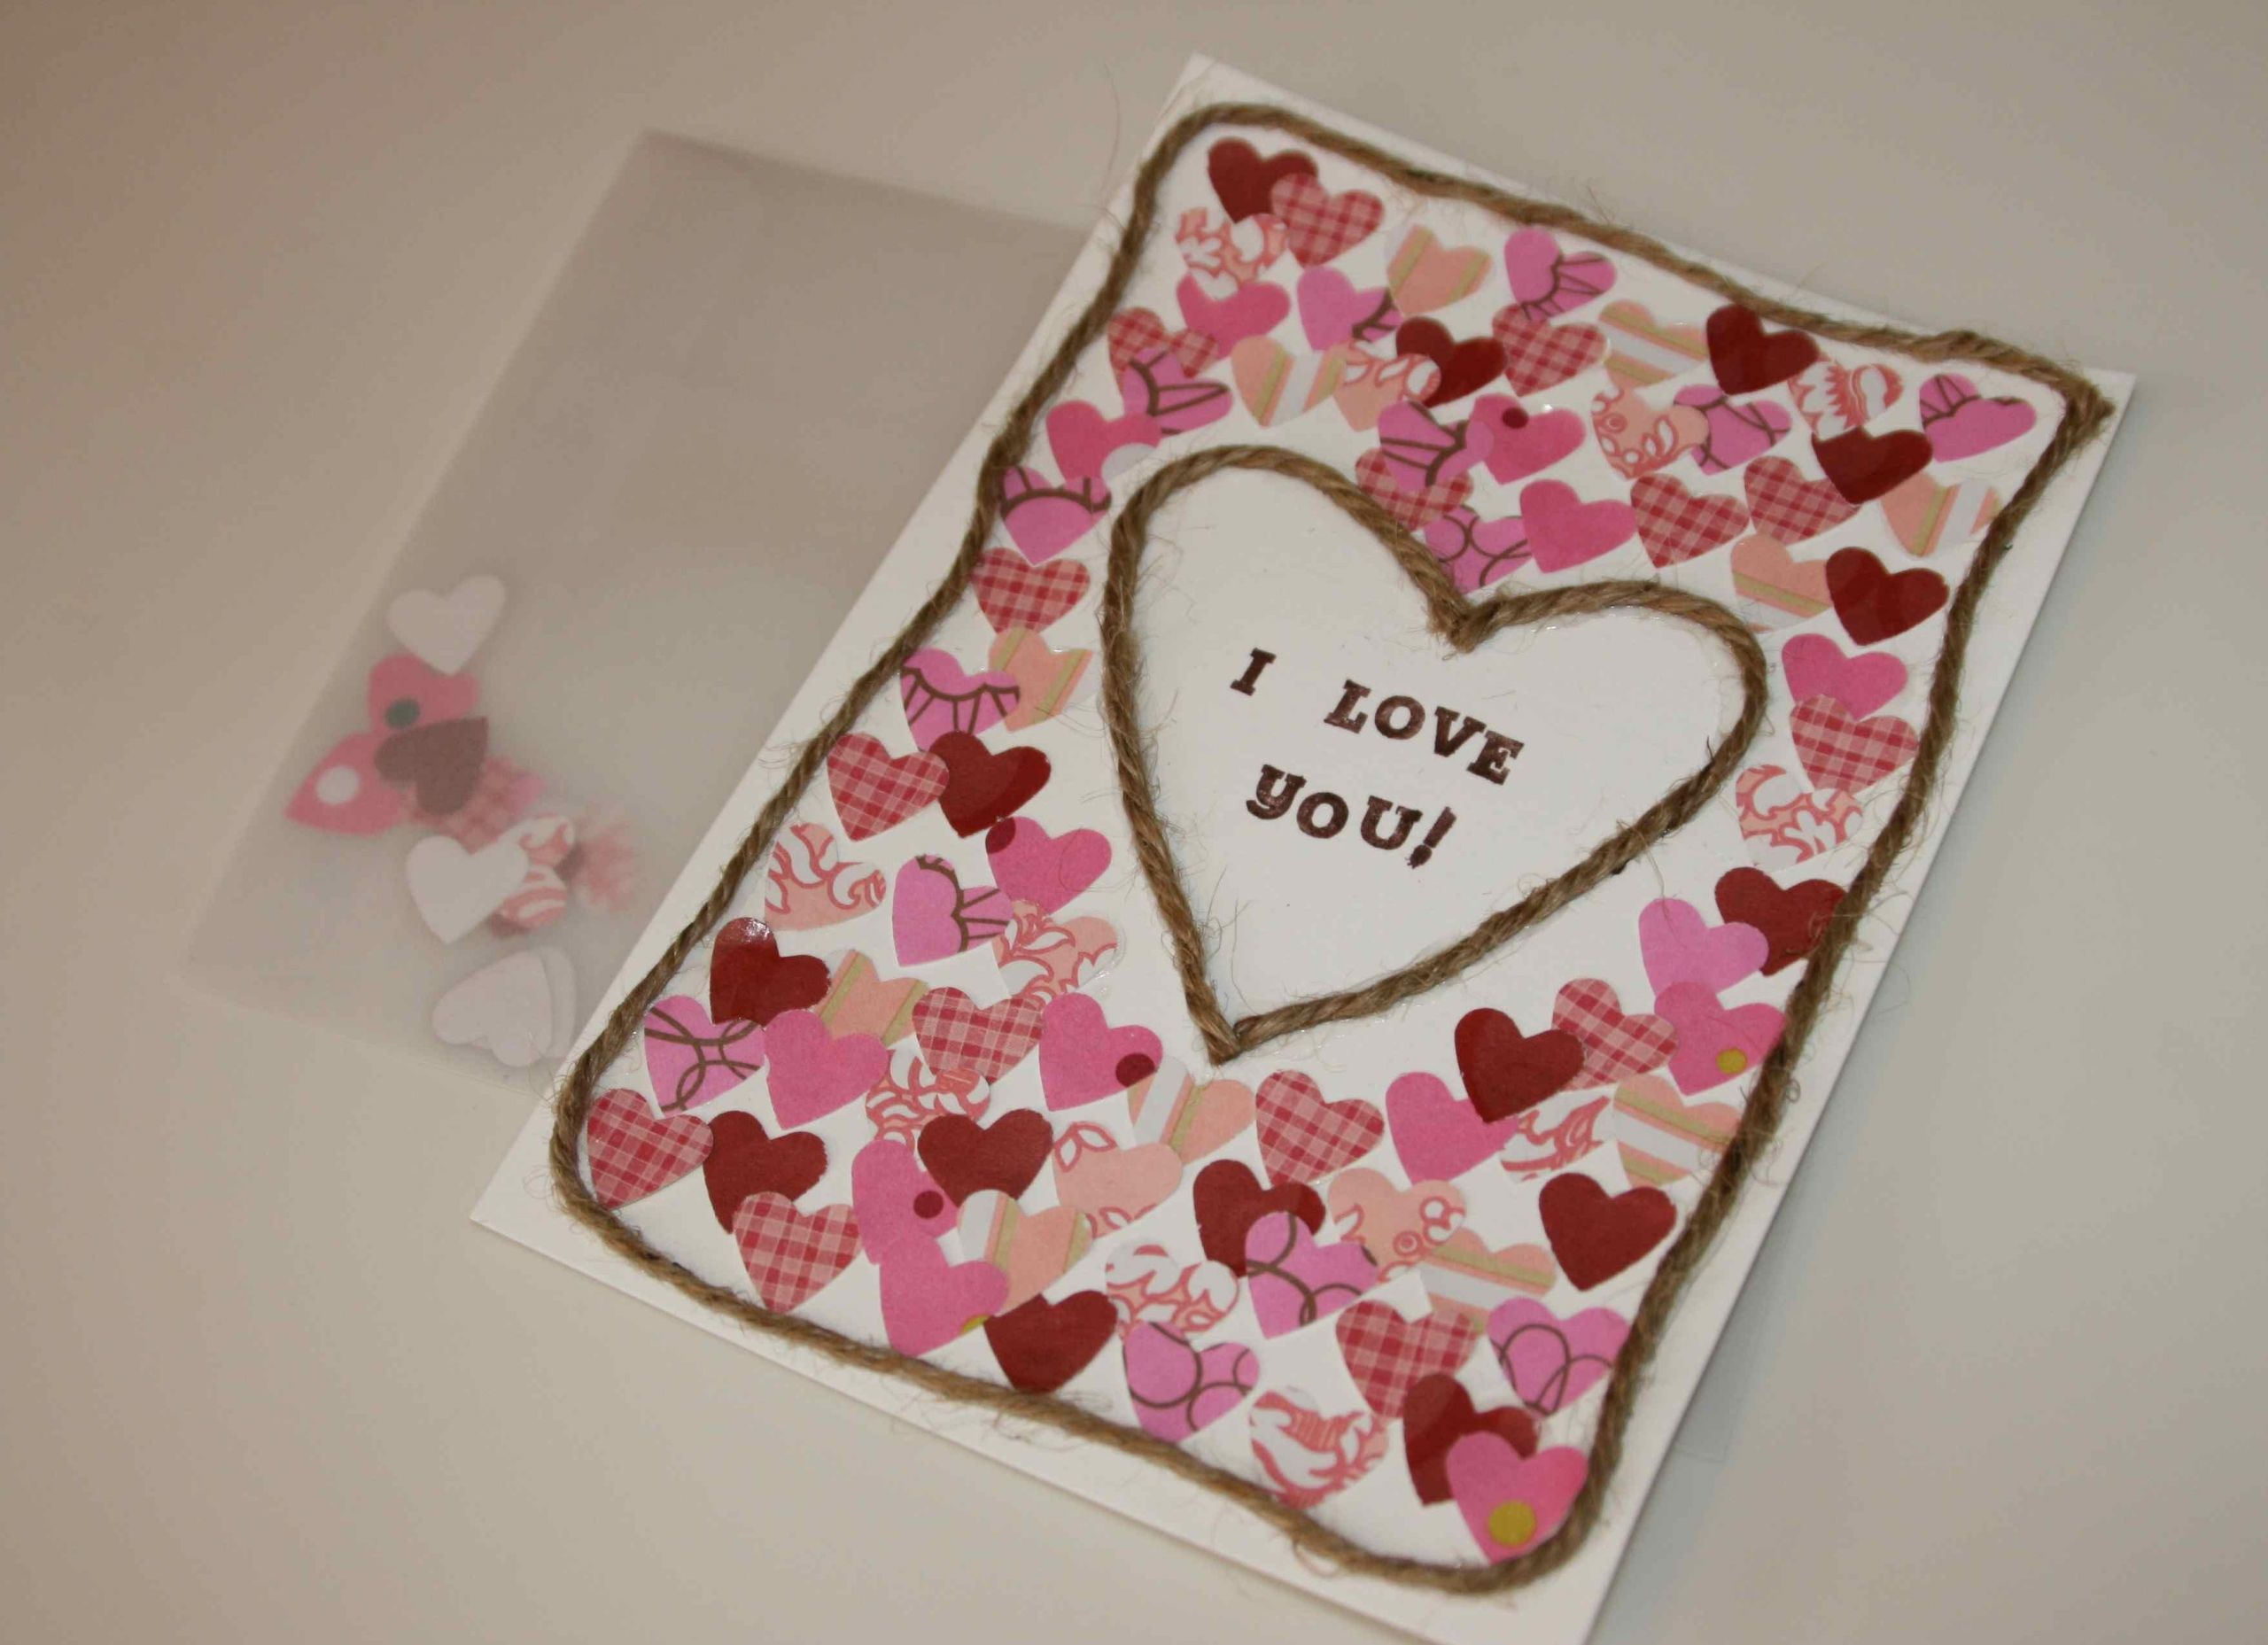 Valentines Day Gifts Cards
 Top 10 Best Homemade Valentines Day Gifts